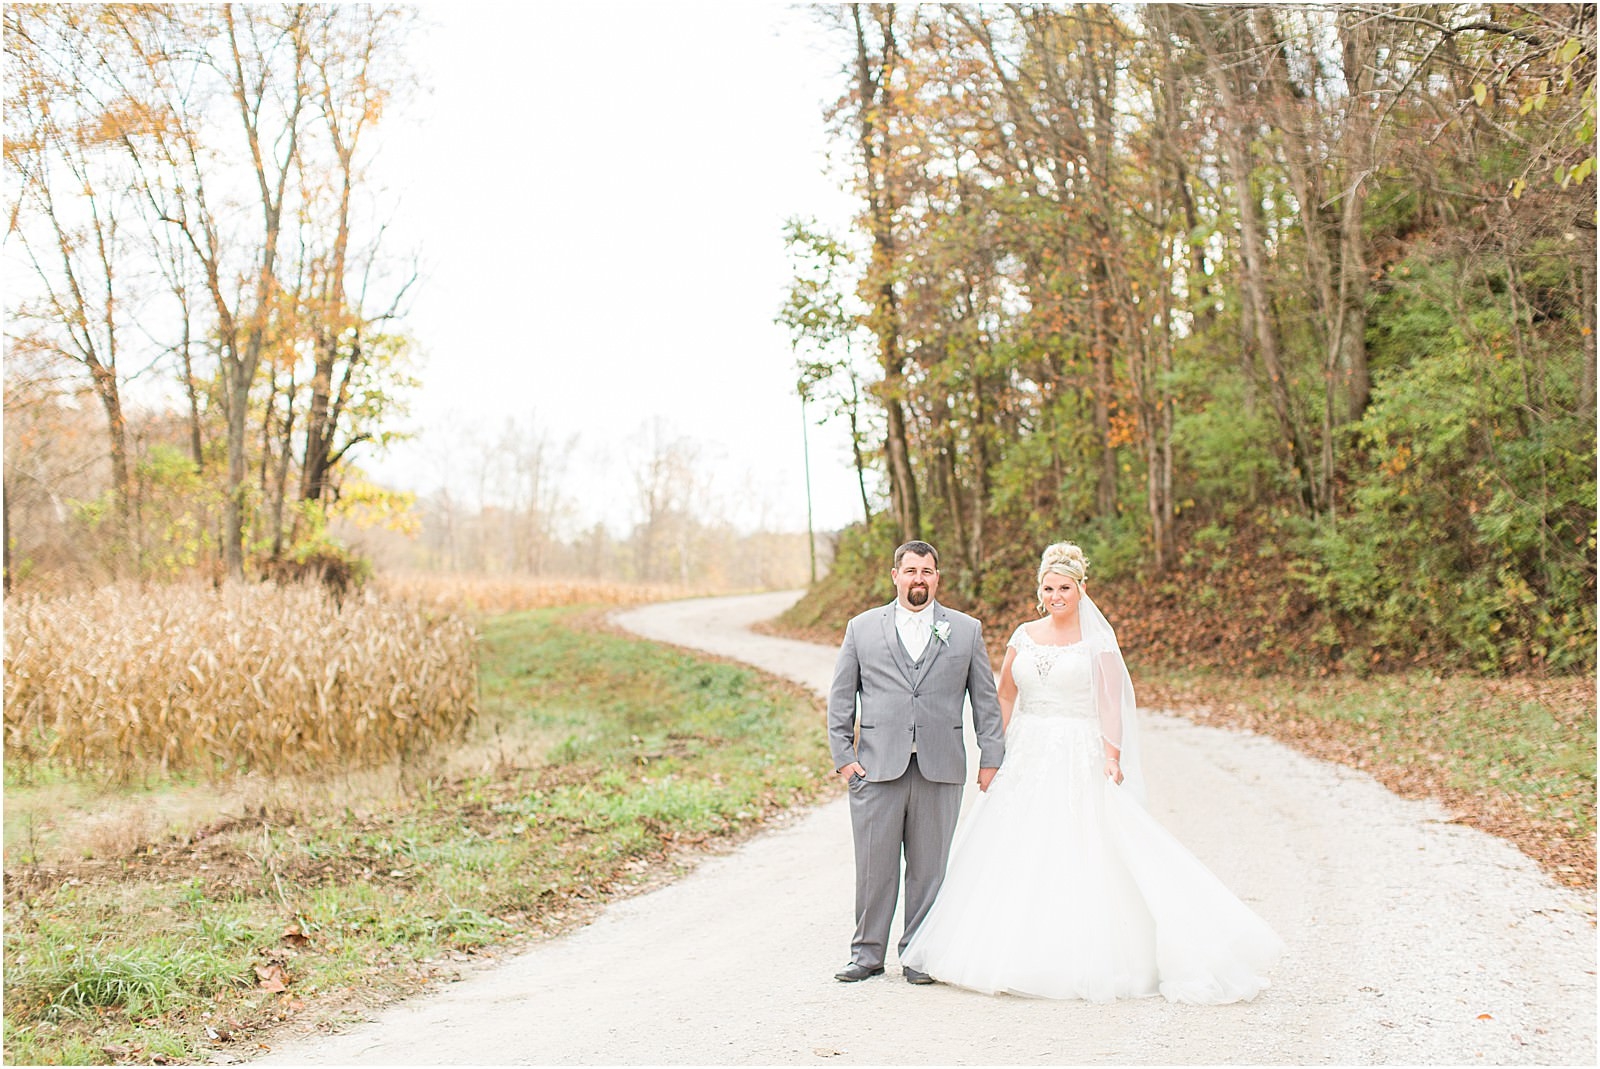 A Navy and Blush Wedding in Tell City Indiana | Brianna and Matt | Bret and Brandie Photography 0122.jpg